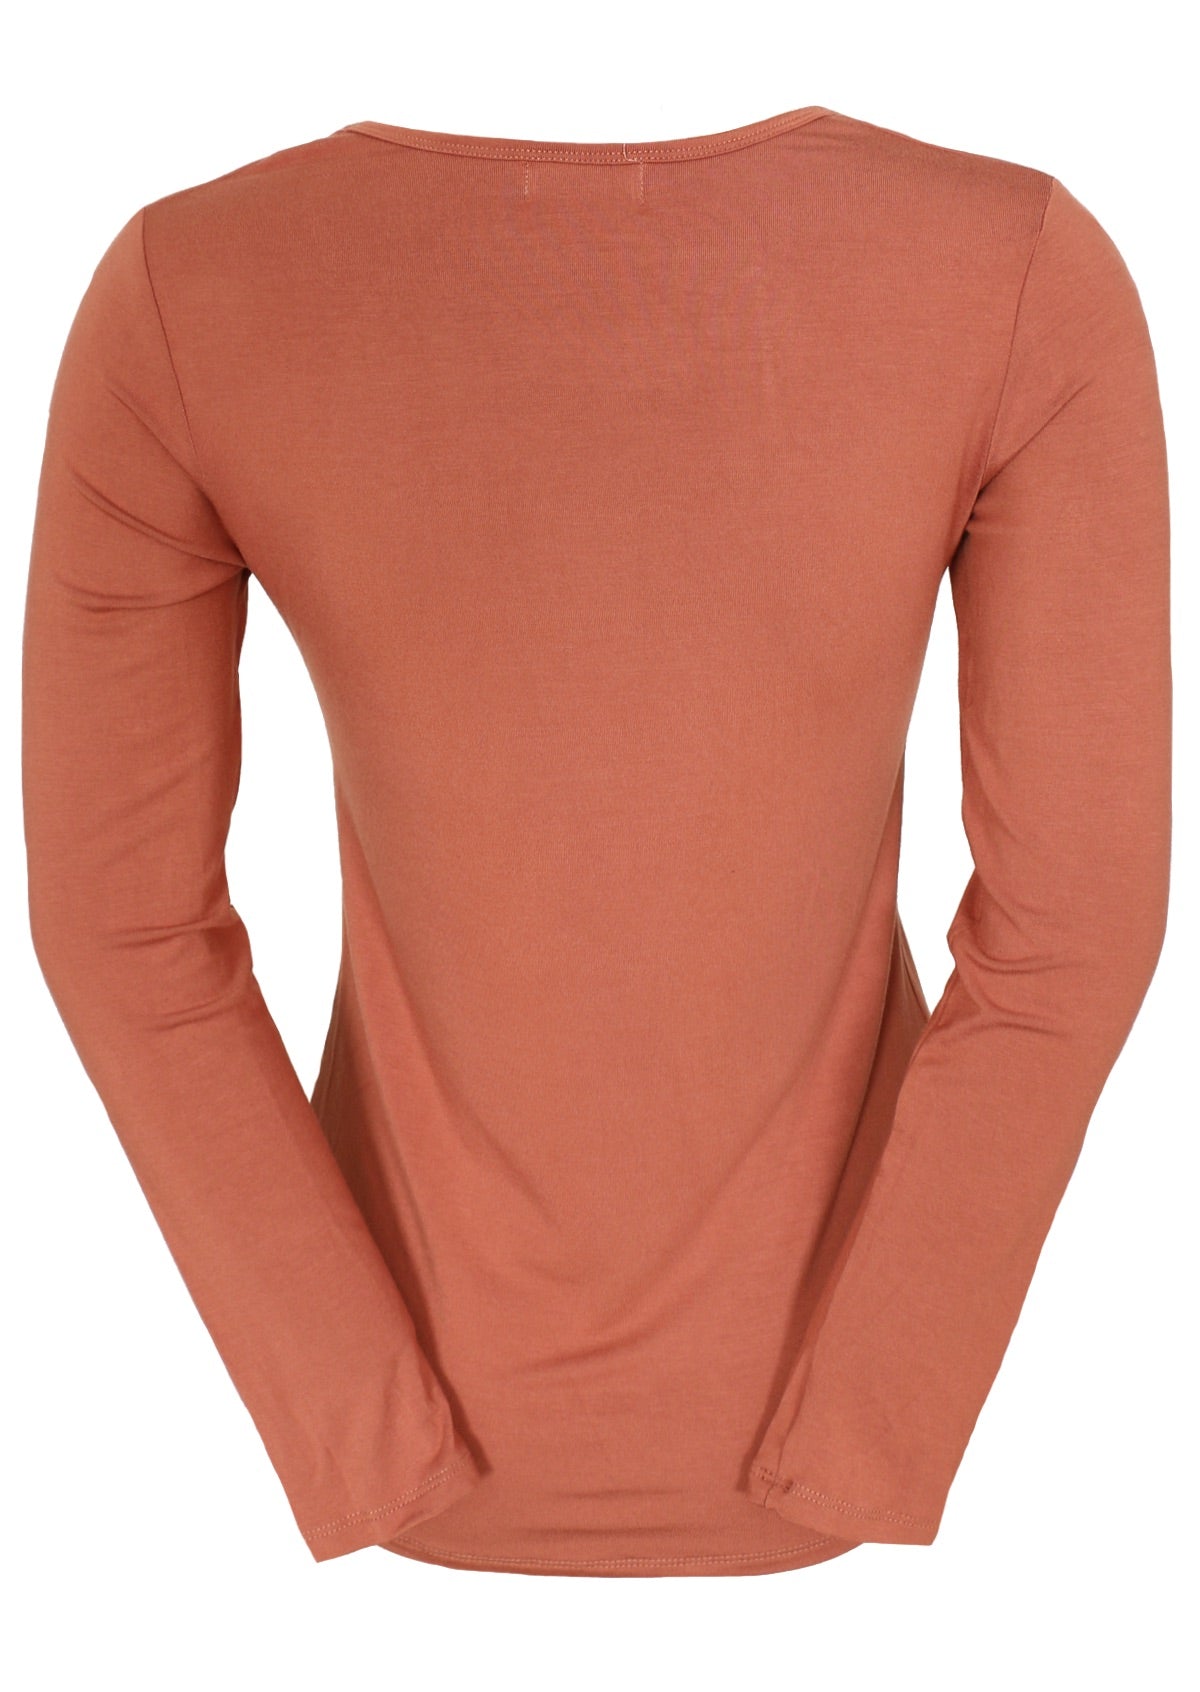 Back view of women's round neck dusty pink long sleeve rayon top.